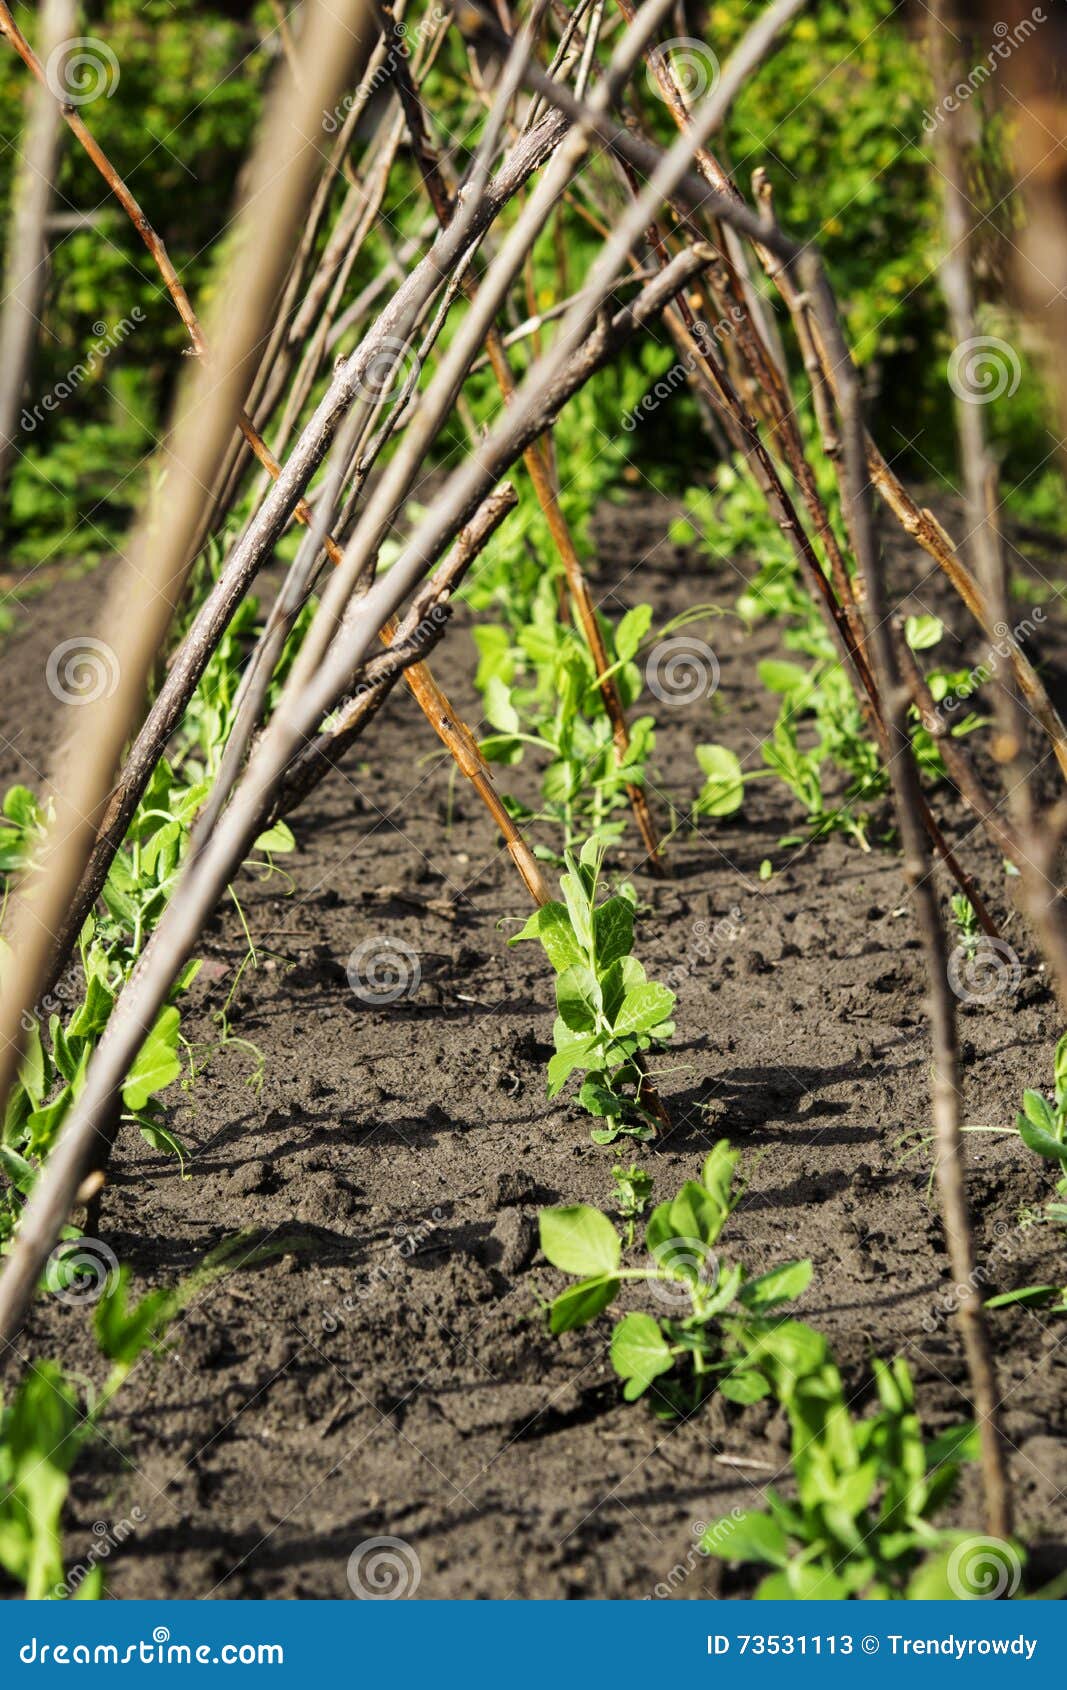 High Garden Bed With Trellis For Peas Stock Image Image Of